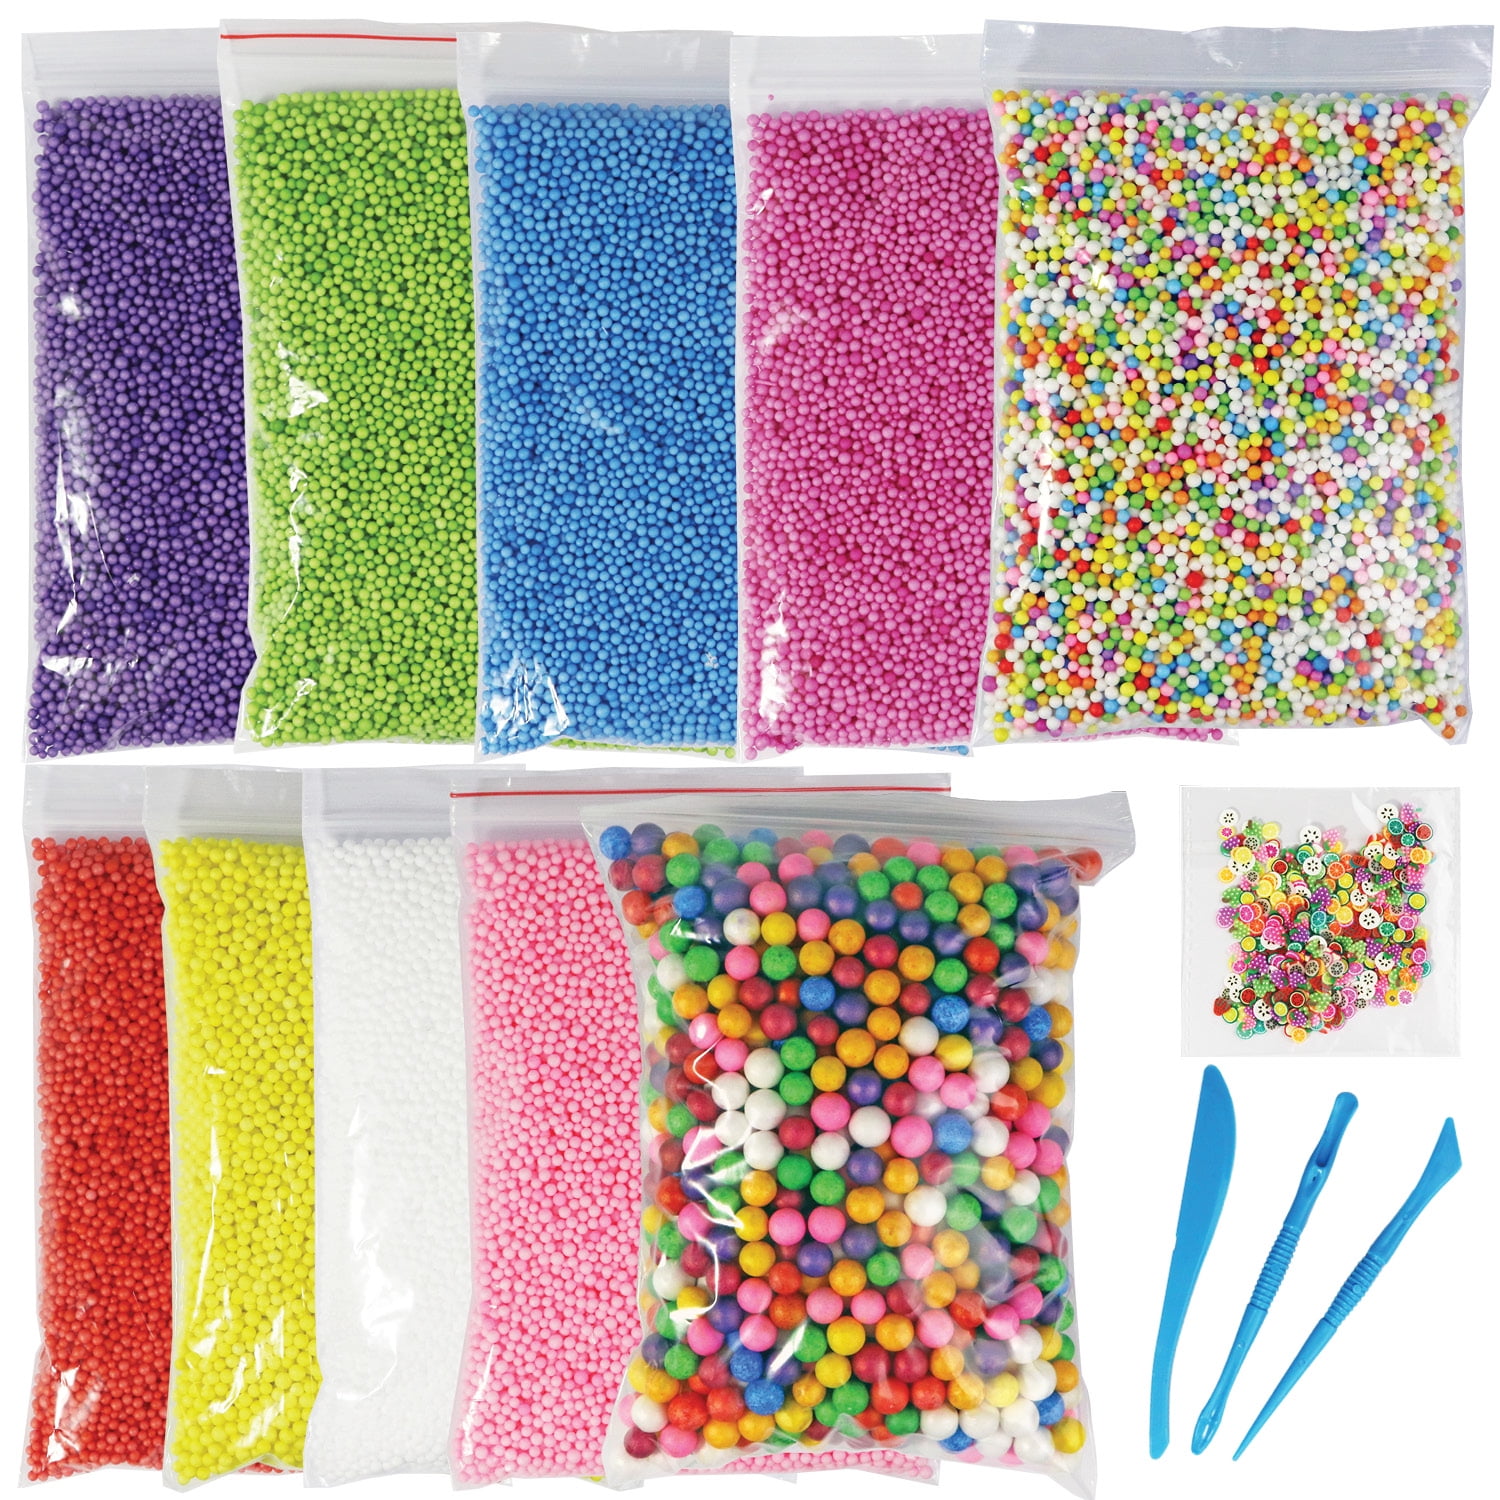 50000pcs Foam Beads for Slime 0.08-0.18 Inch Craft Foam Balls(4Pack) Ideal  For Homemade Slime, Kid's Craft, Wedding and Party Decoration, Bonus Fruit  Slice + Spoon + Stir Sticks + Slime Containers –